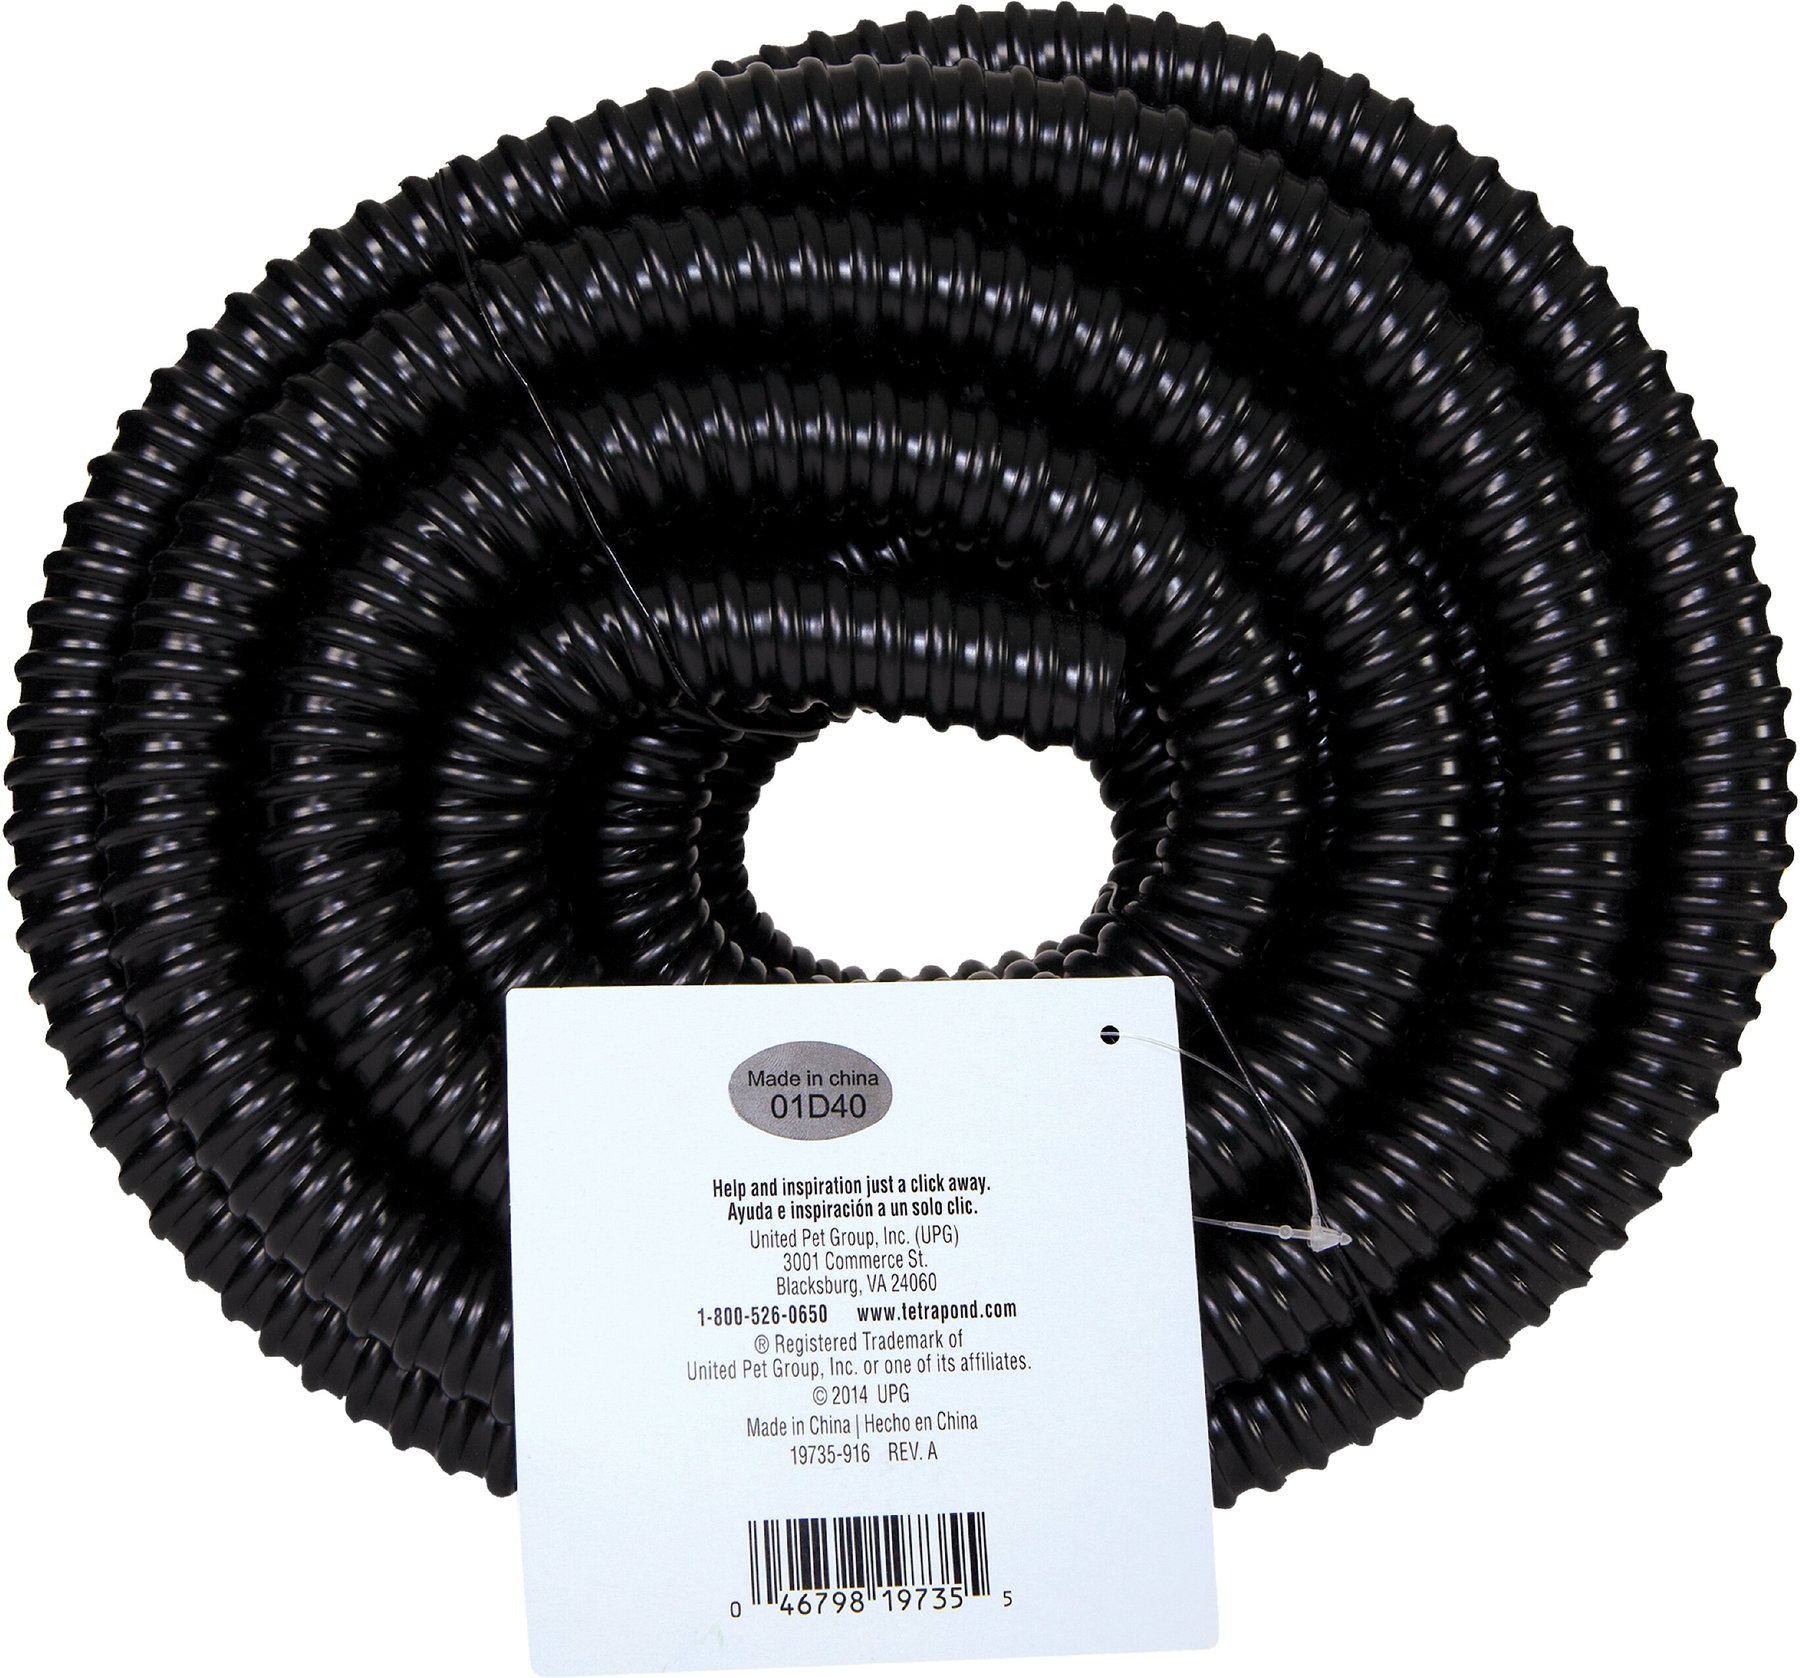 TetraPond Pond Tubing 1 Inch Diameter 20 Feet Long Connects Components for sale online 